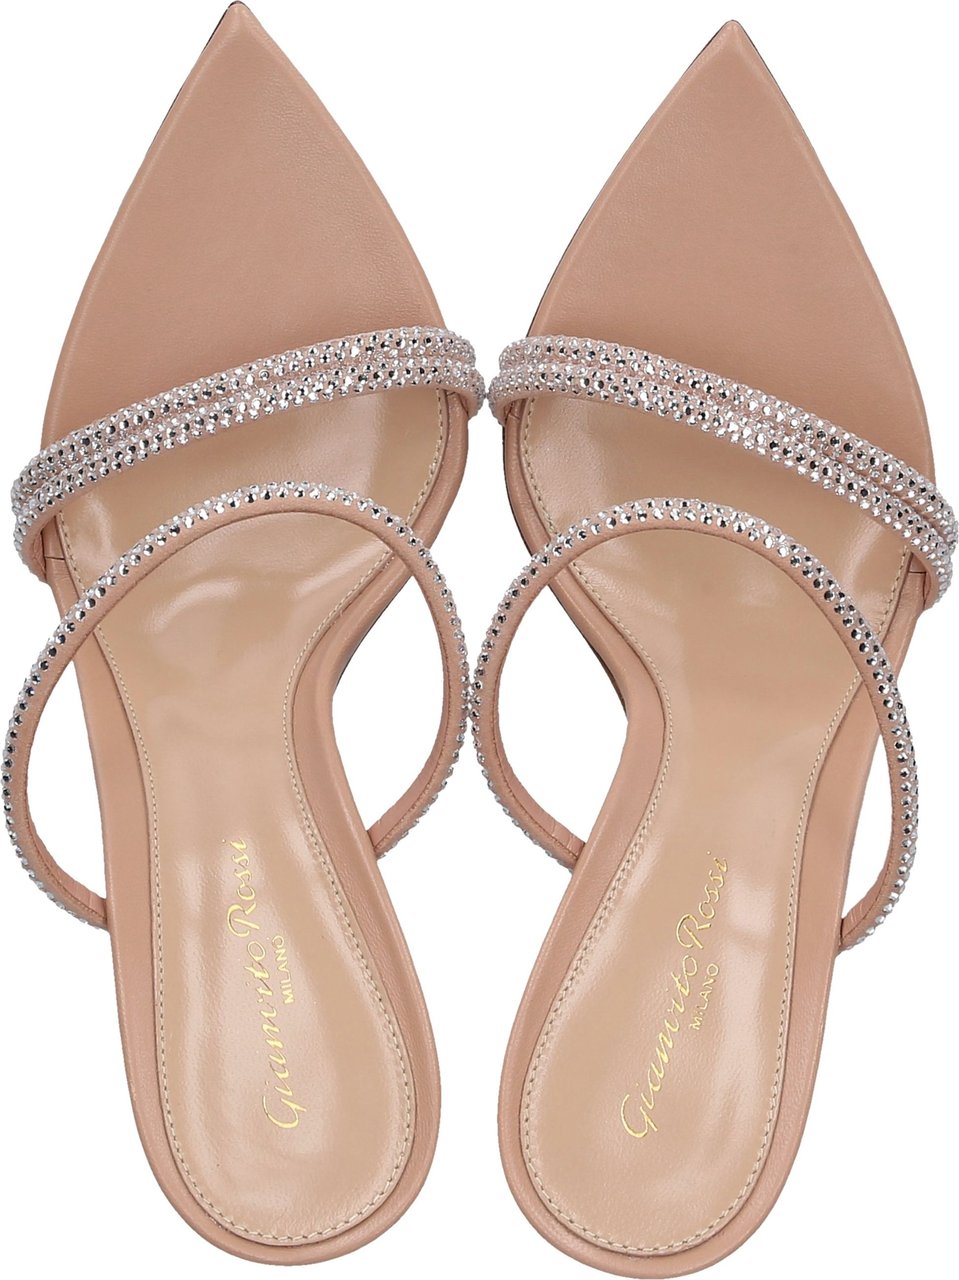 Gianvito Rossi Sandals Cannes Strass Snake Beige